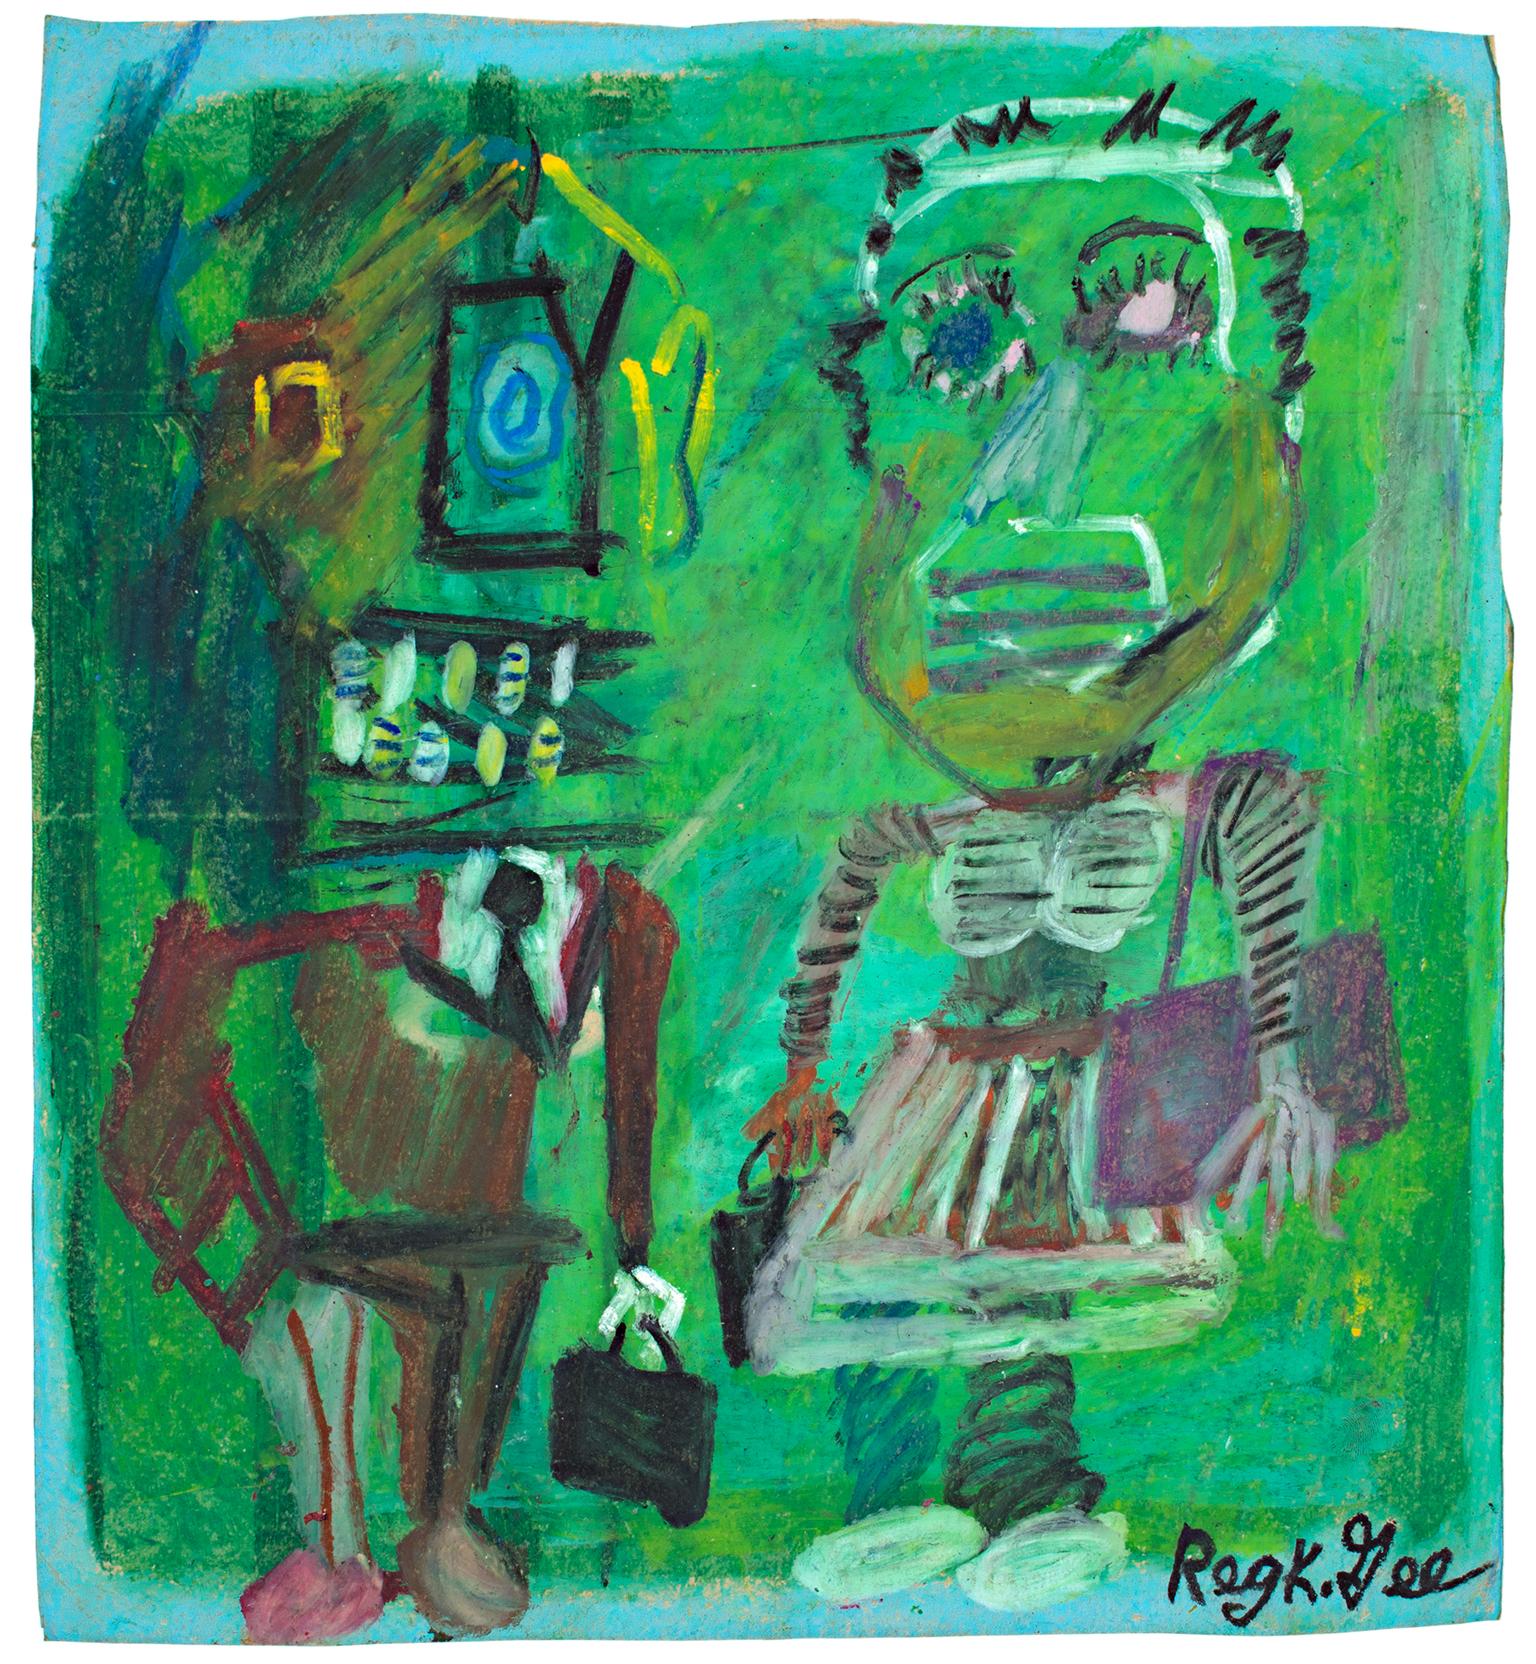 "Comedians at the Airport" is an original oil pastel drawing on a grocery bag by Reginald K. Gee. The artist signed the piece lower right. It depicts two abstracted figures over a field of green. 

13 1/4" x 12" art
custom framing options